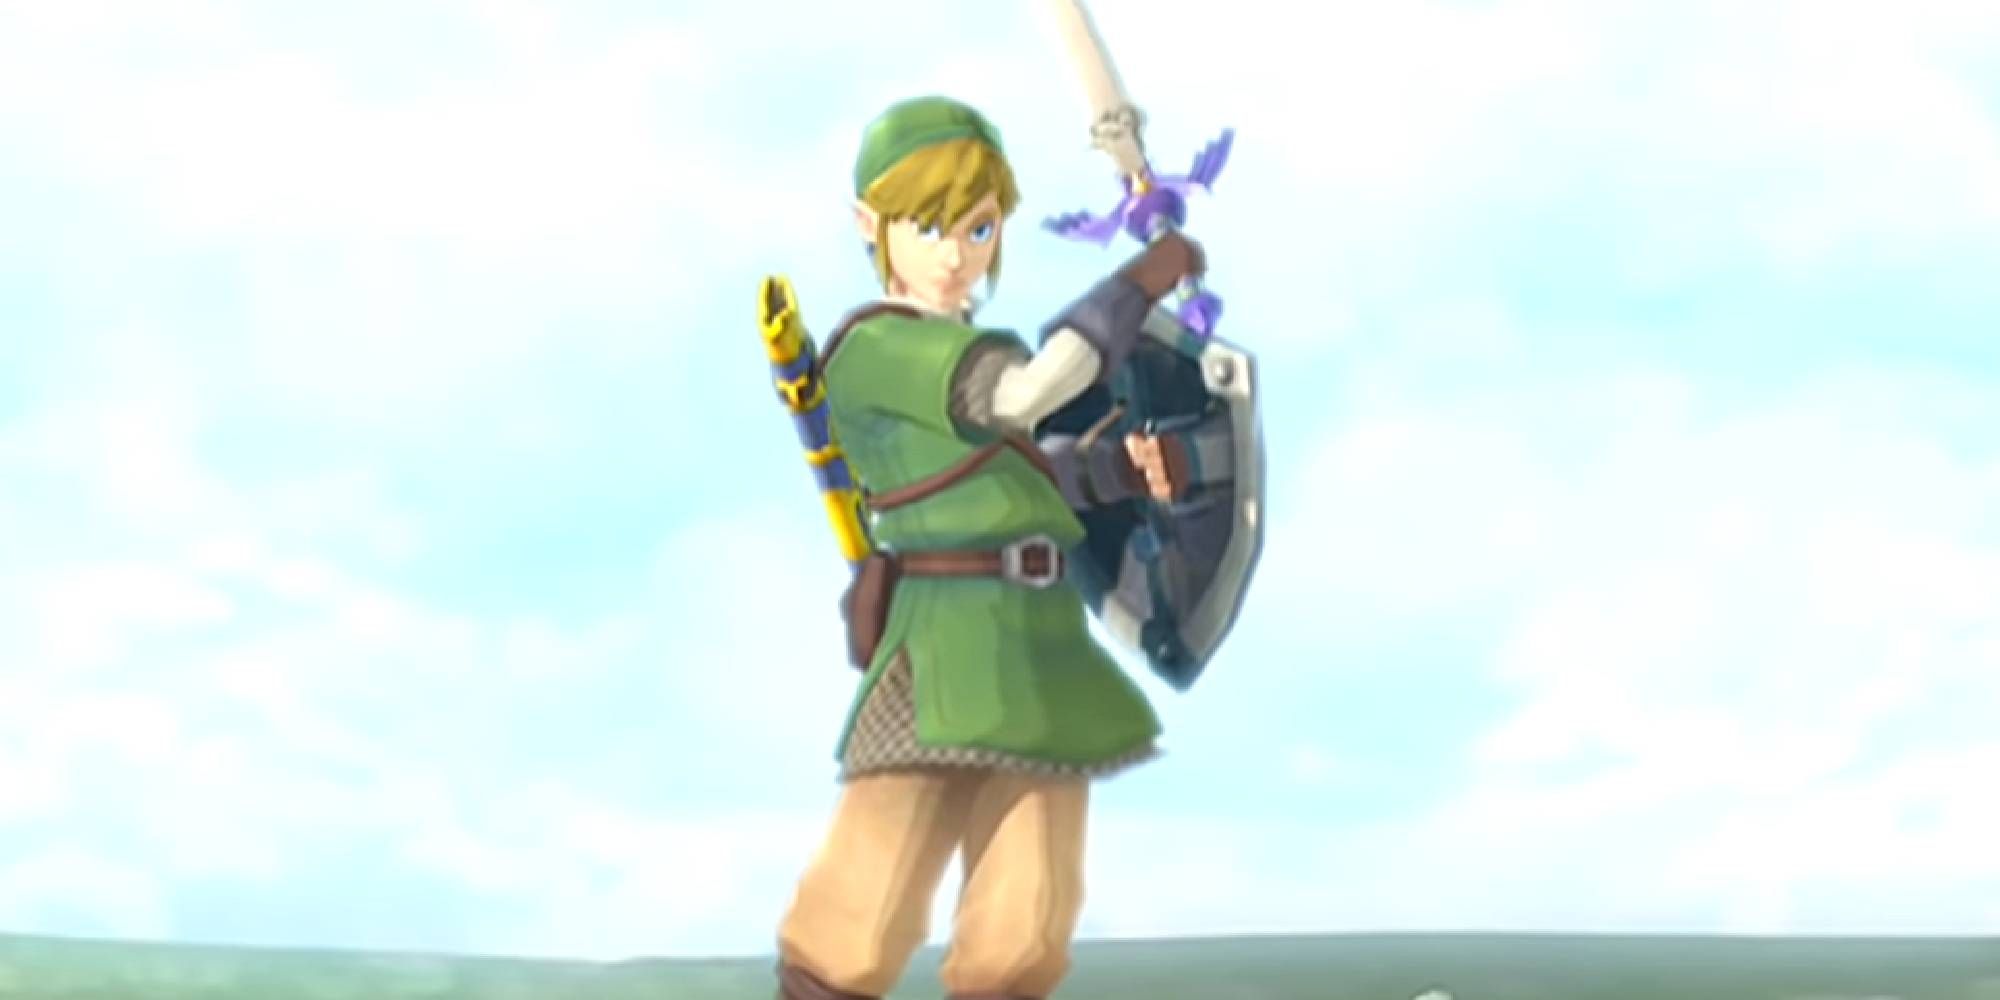 Link using his sword in the reveal trailer for Skyward Sword.